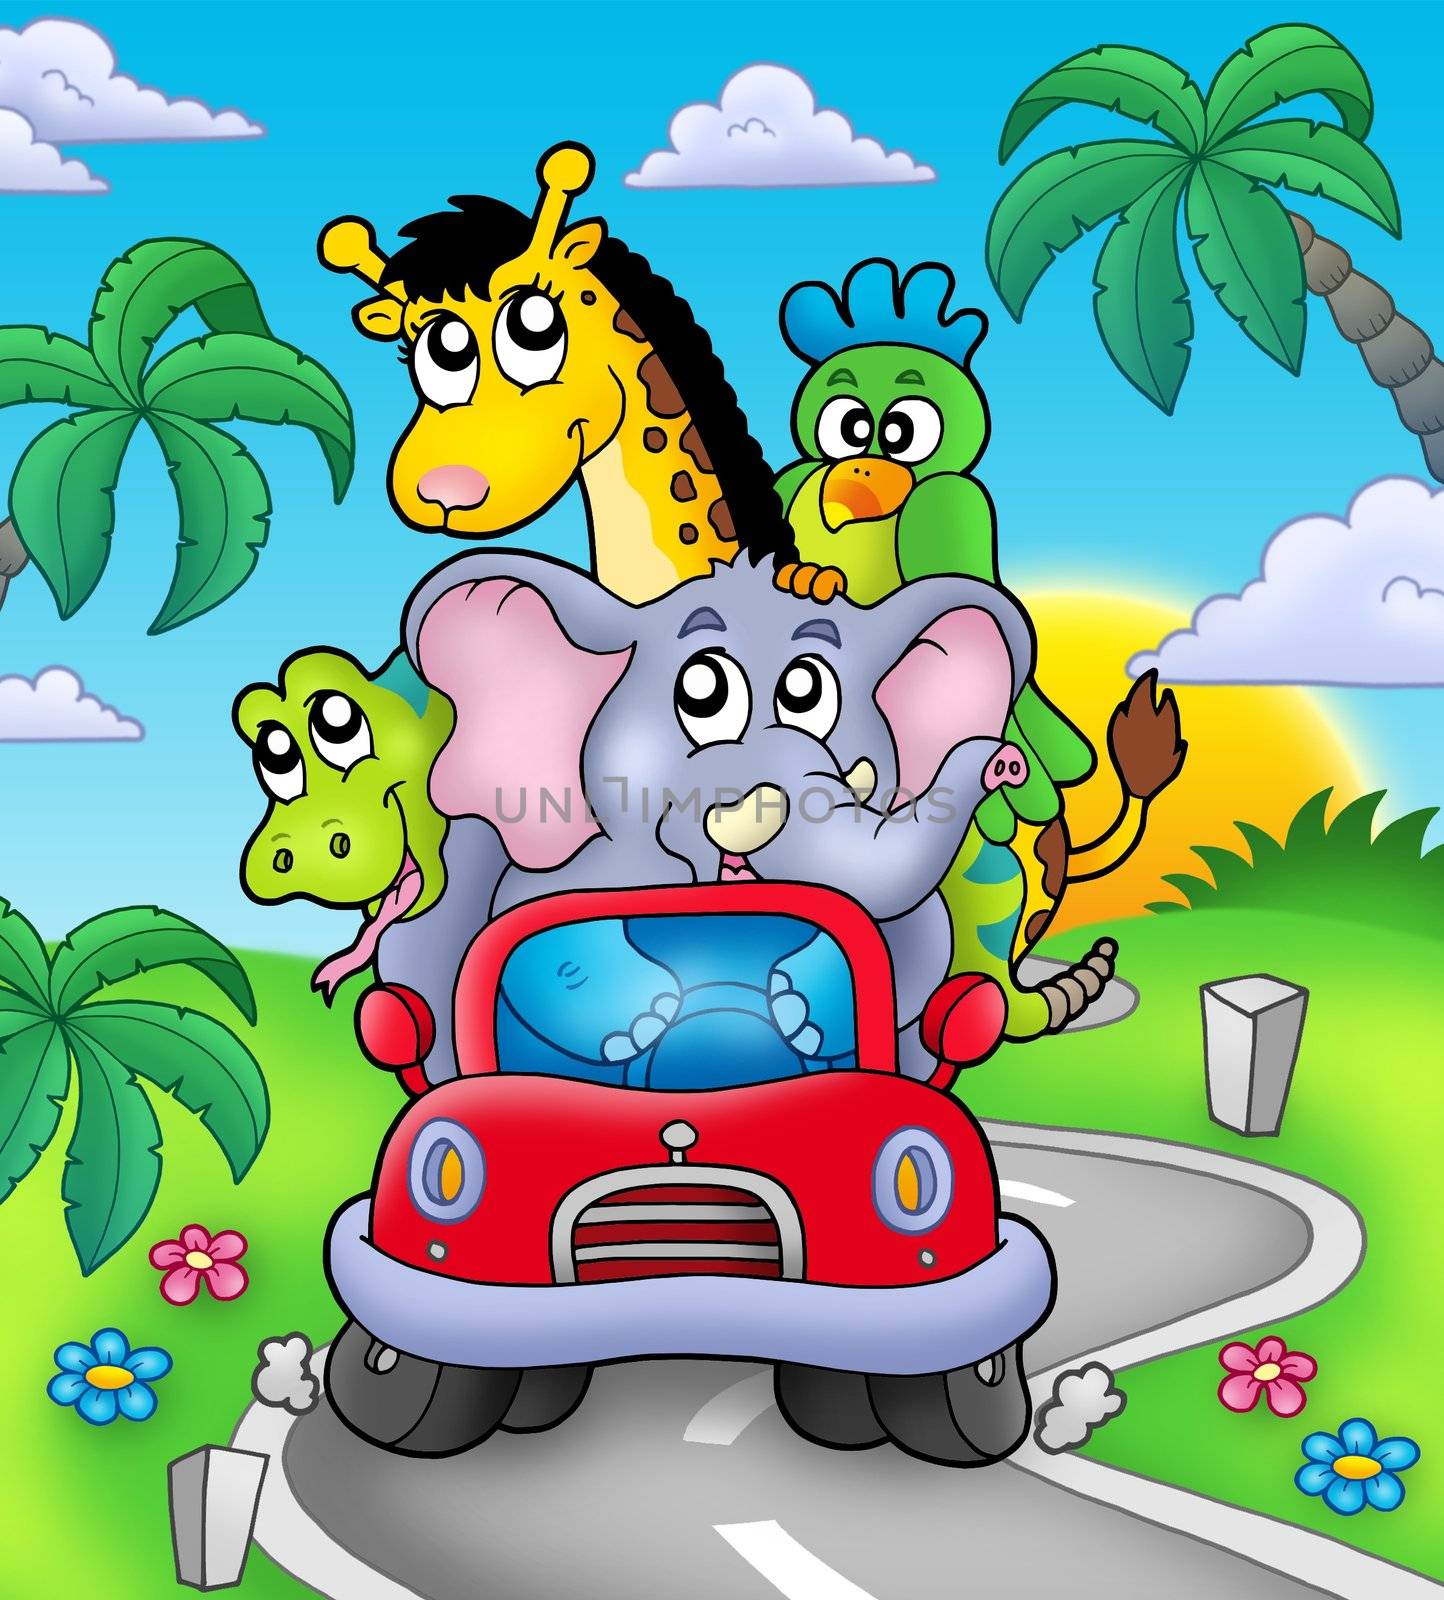 African animals in car on road - color illustration.